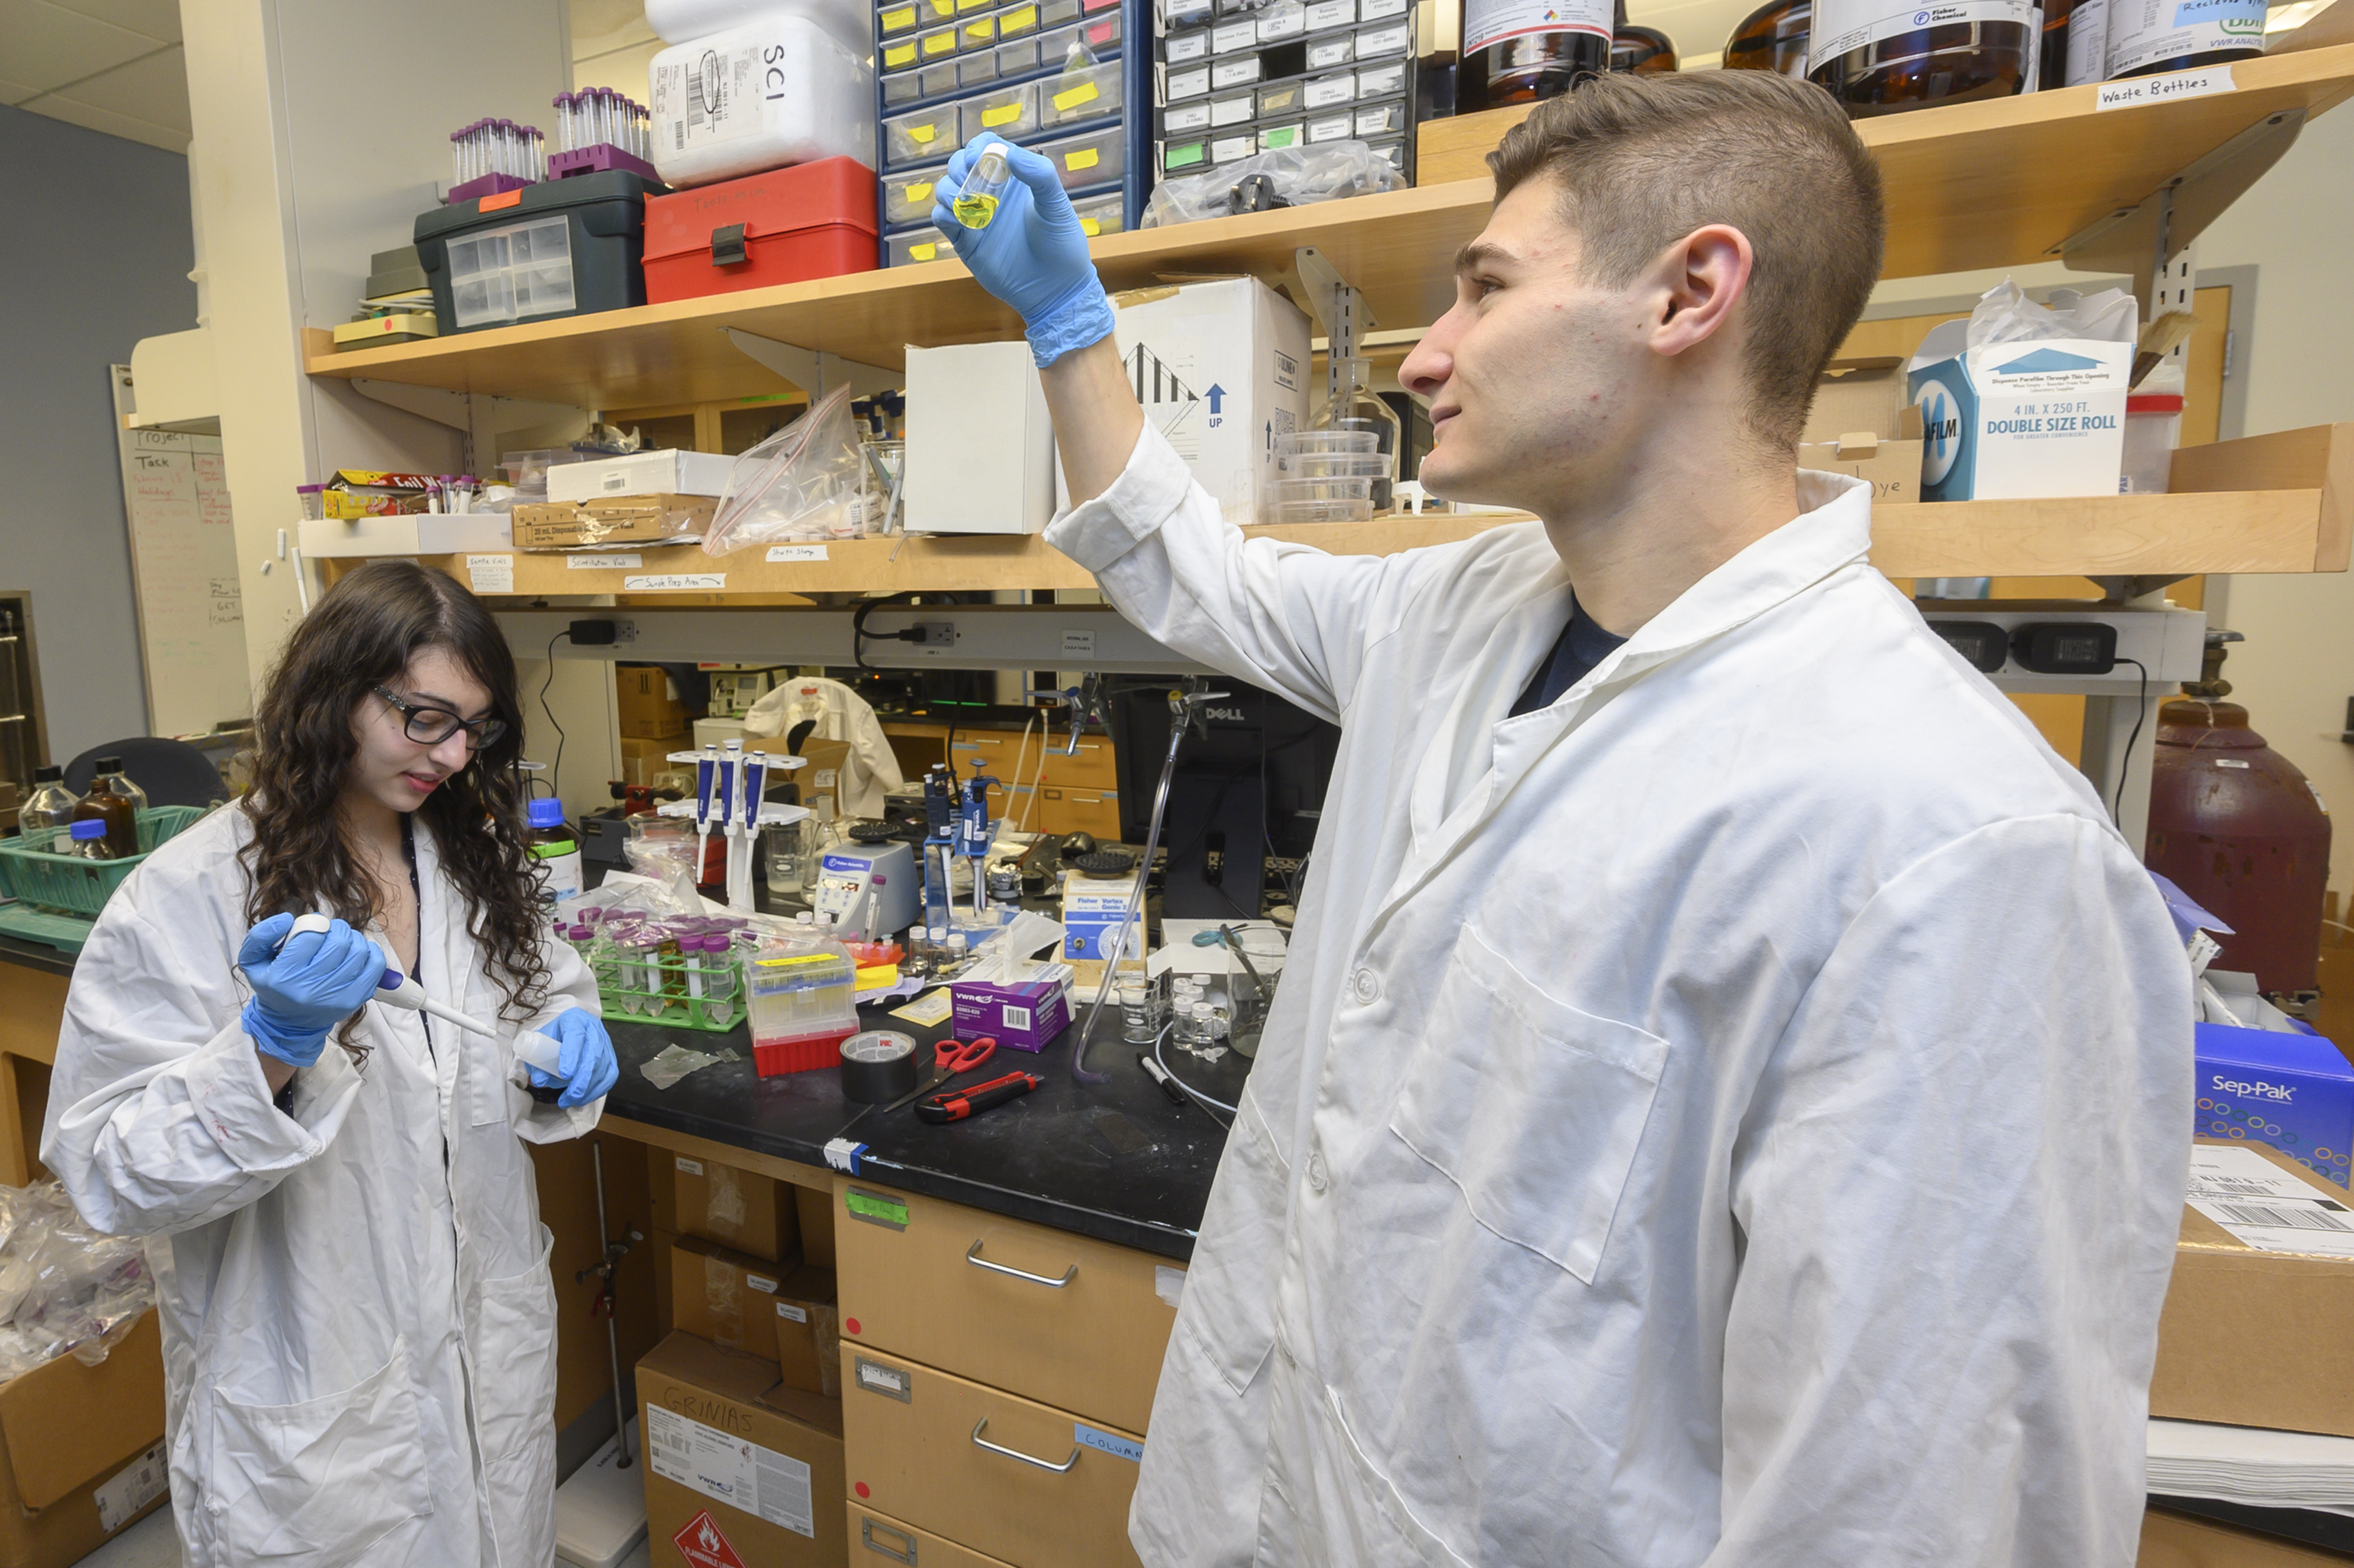 Rowan's rapid research growth is paying off for undergraduates - Rowan Today